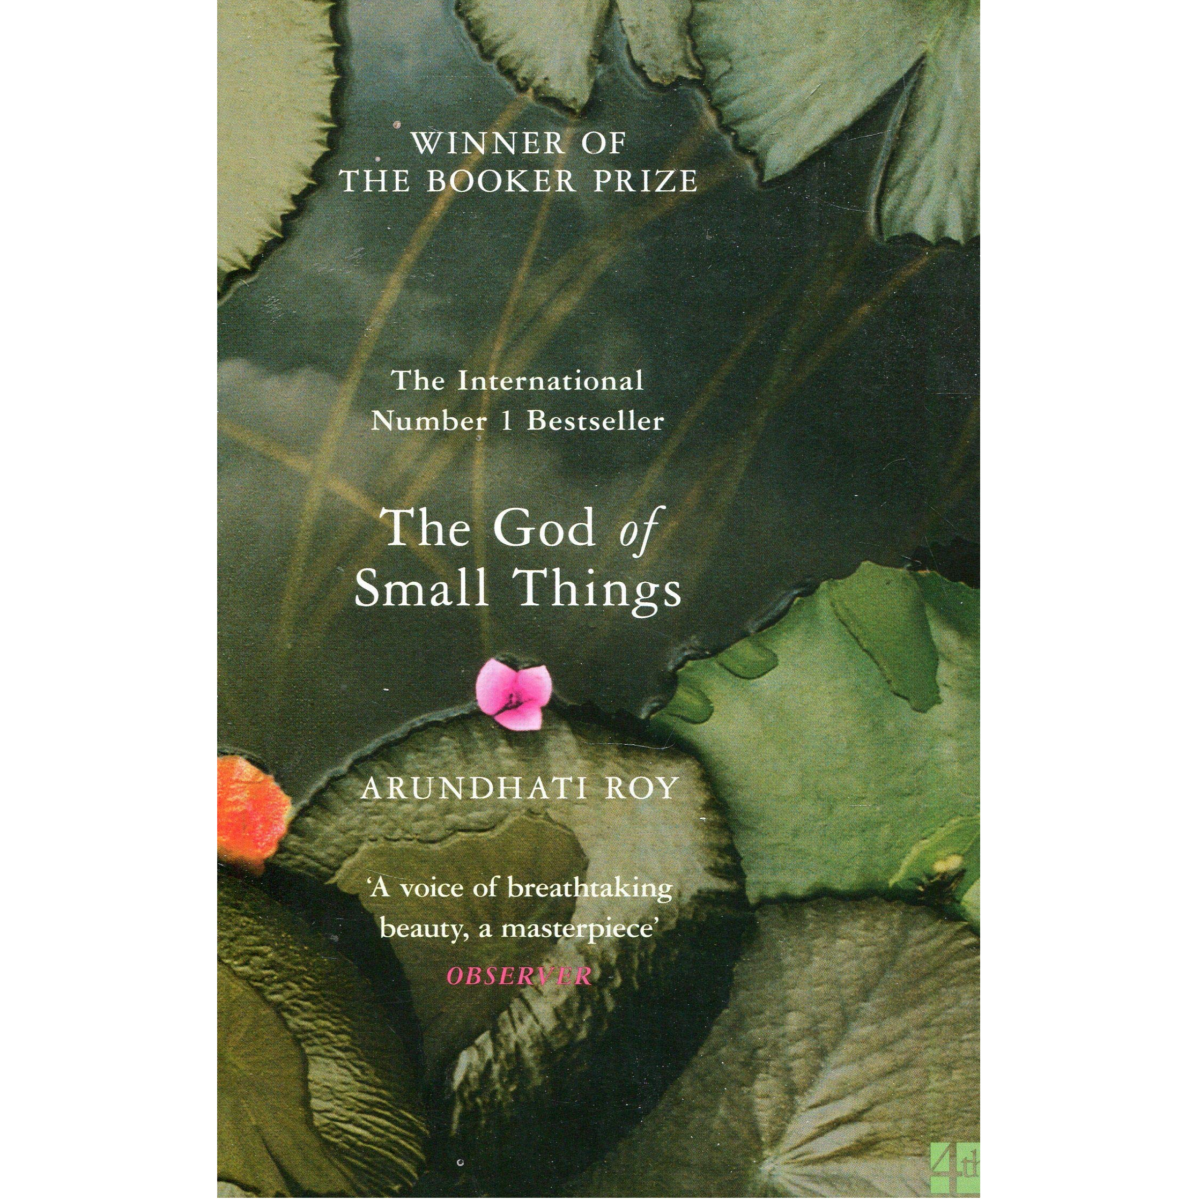 Book review: The God of Small Things by Arundhati Roy